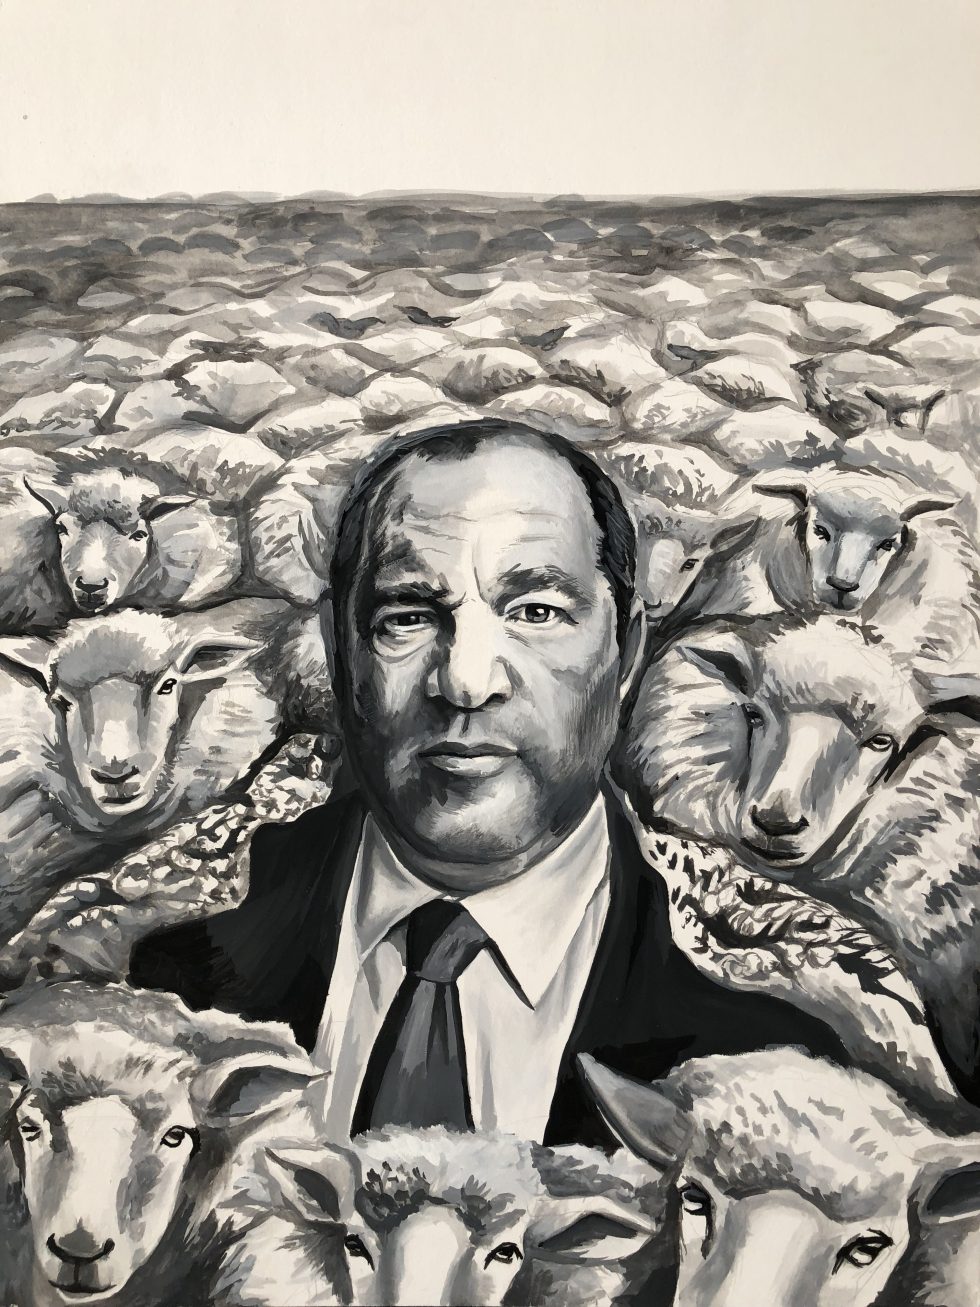 Wolf in sheep's clothing